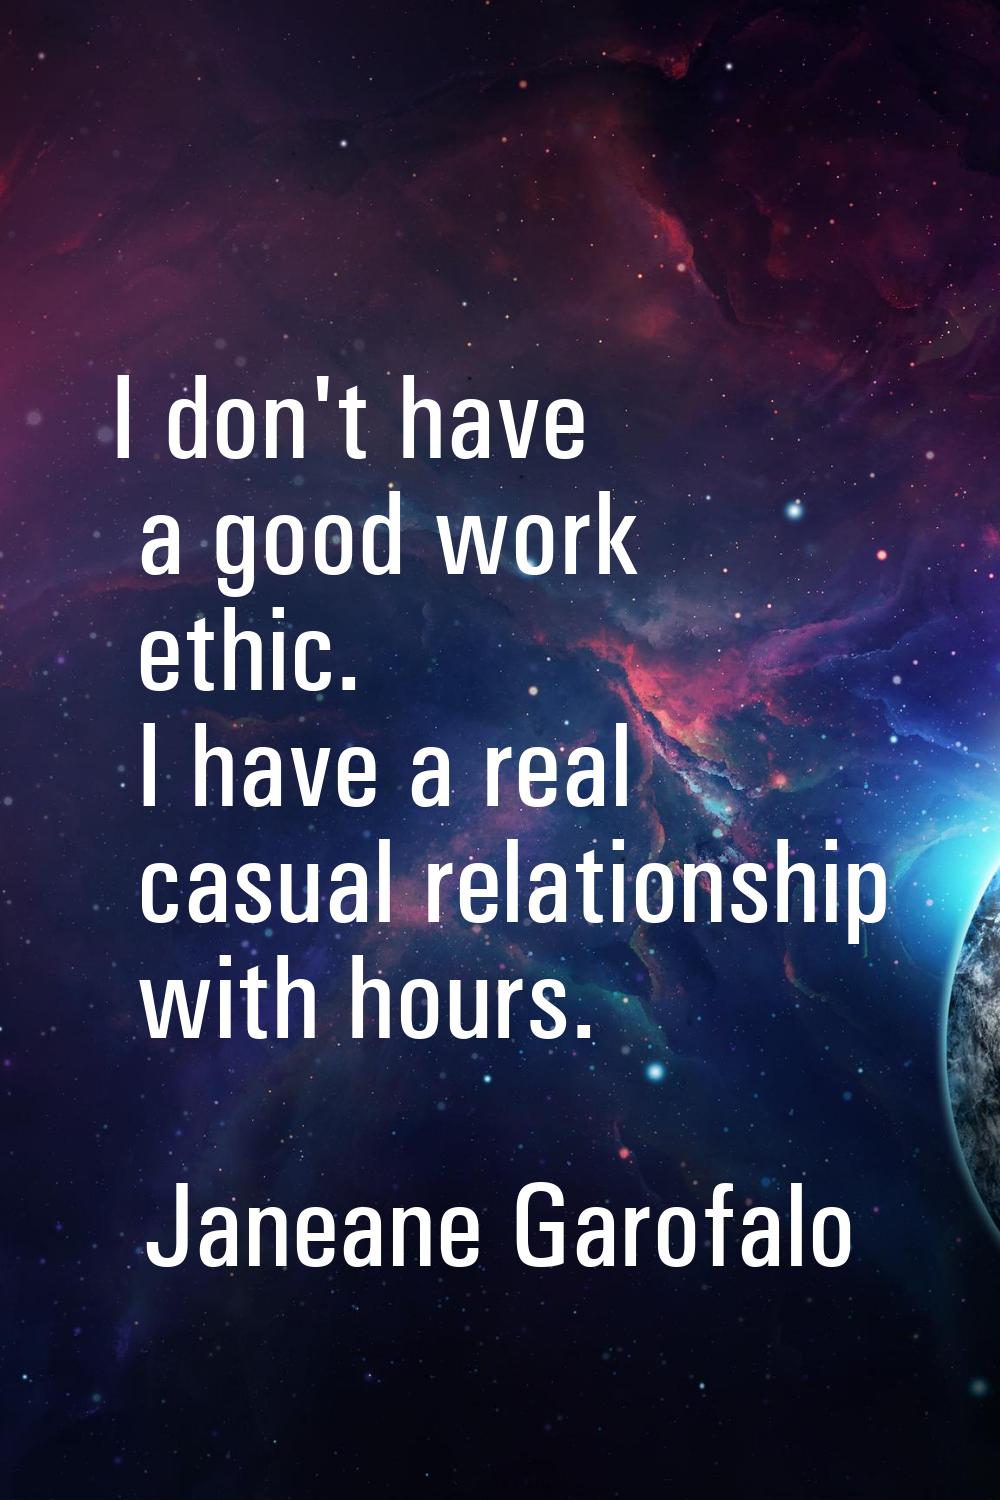 I don't have a good work ethic. I have a real casual relationship with hours.